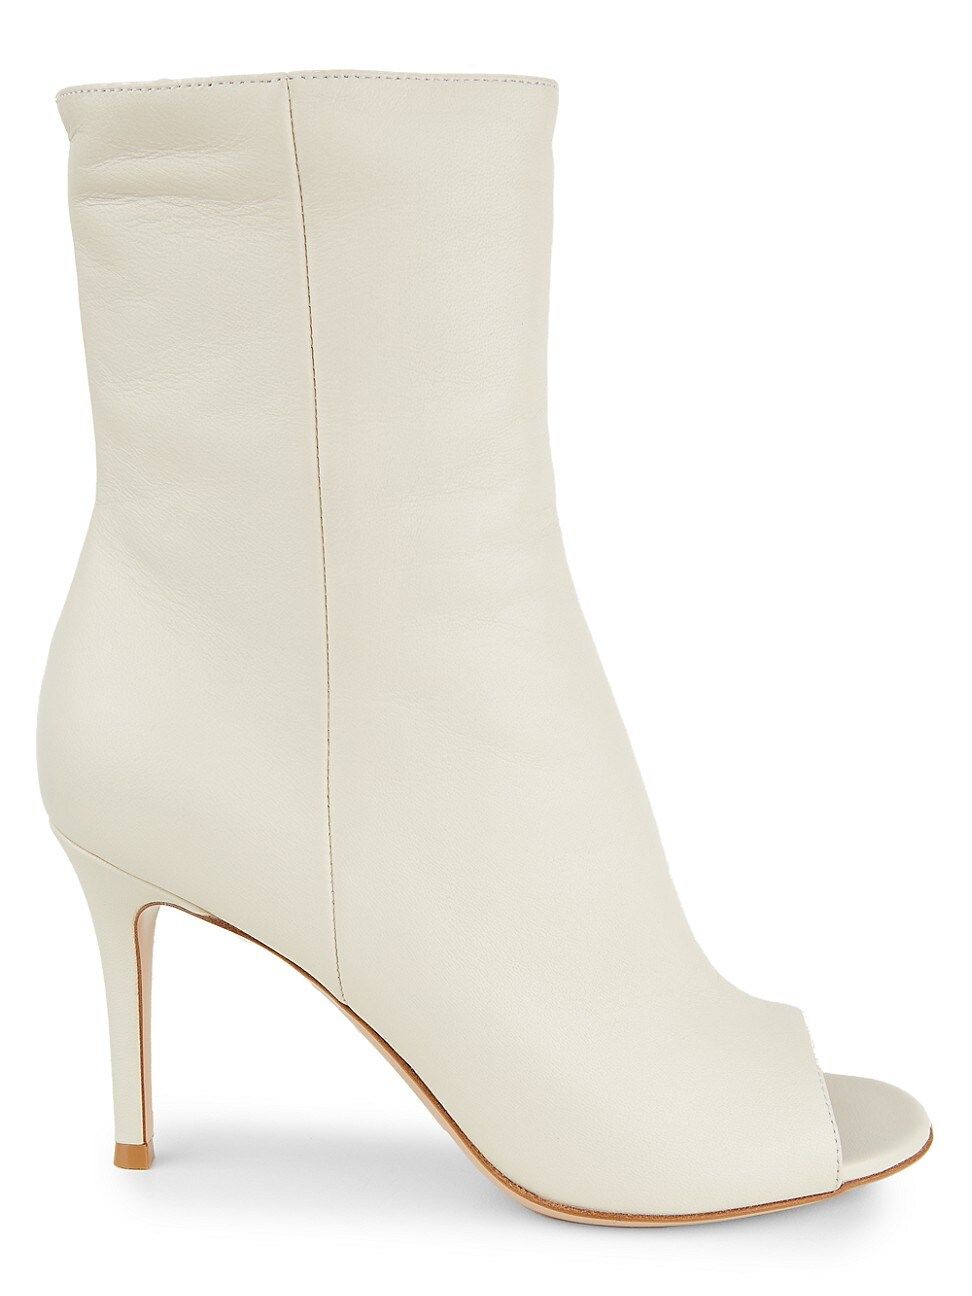 Gianvito Rossi Women's Peep-Toe Leather Booties - Off White - Size 39 (9) | Saks Fifth Avenue